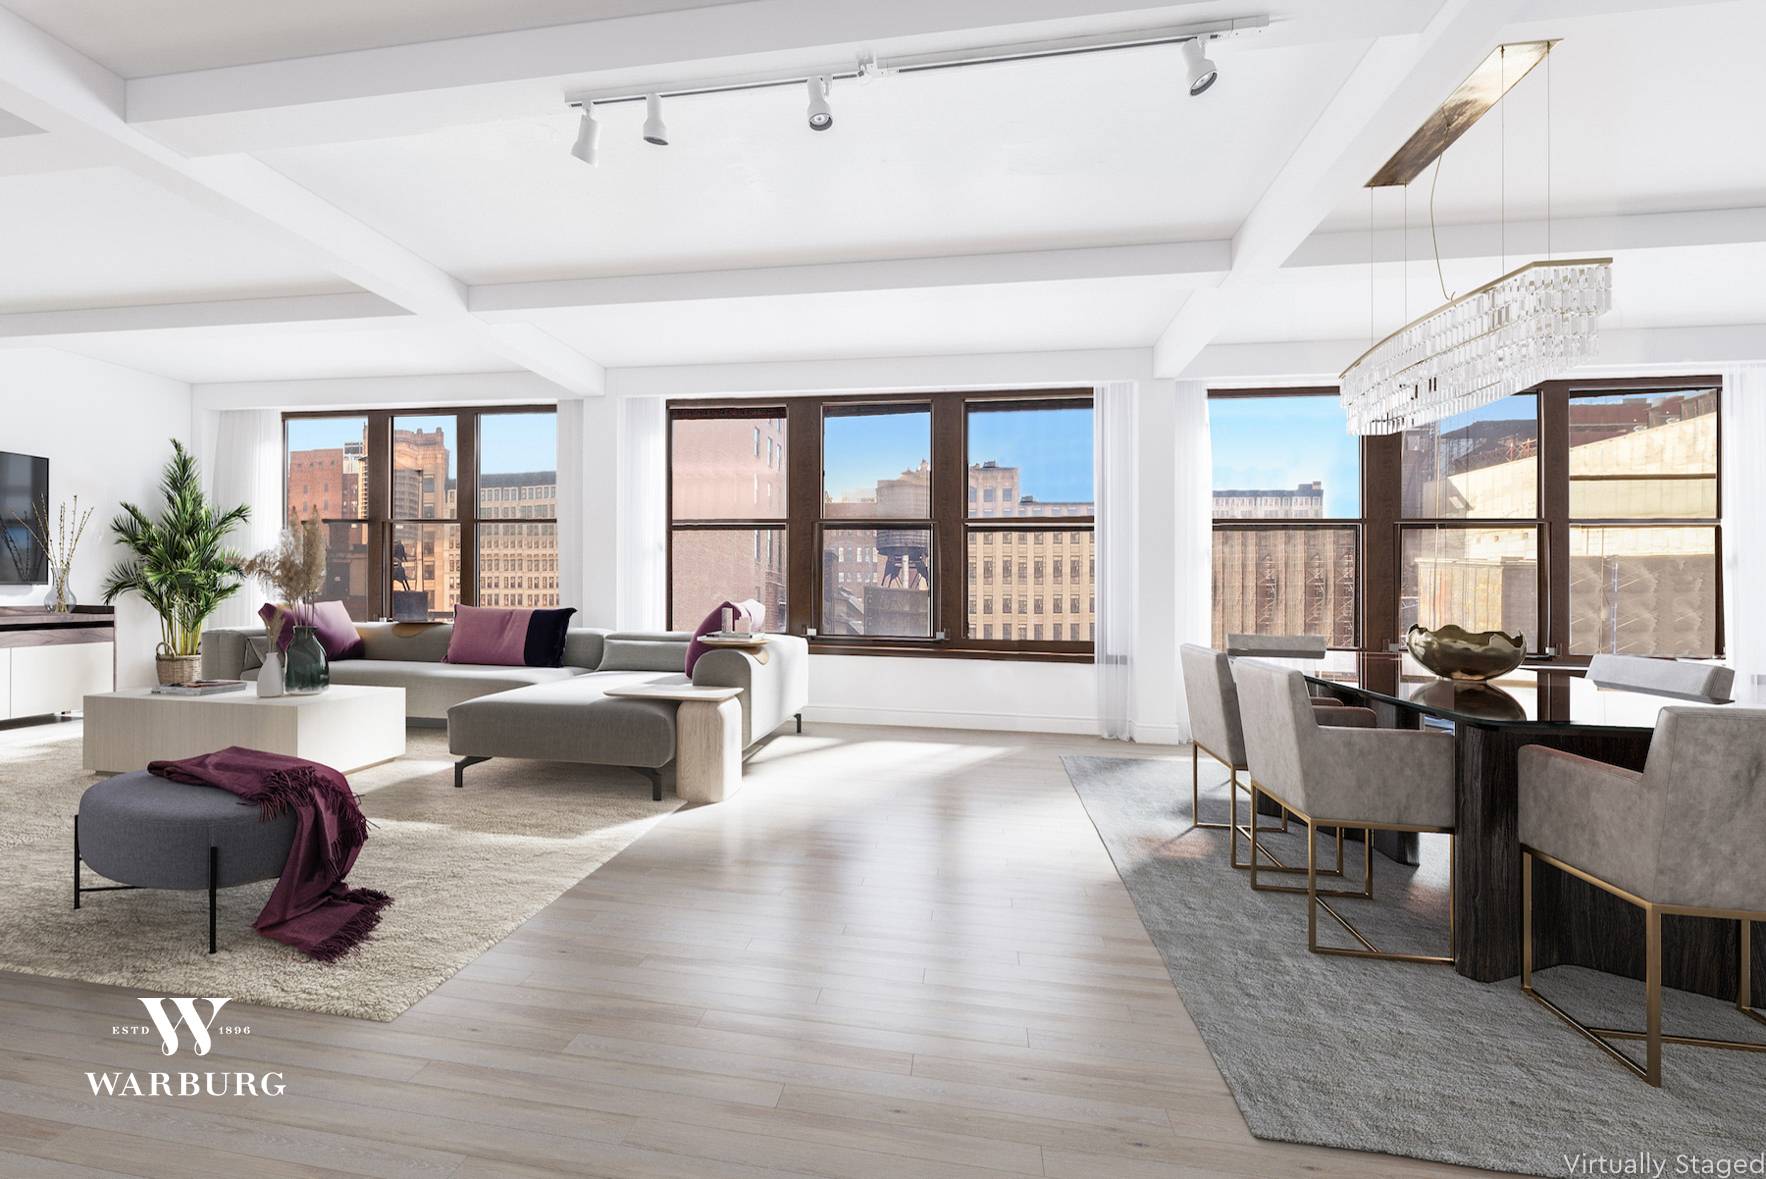 Bring your architect and create your dream loft home in a boutique pre war building, at 15 West 24th Street, steps from Madison Square Park.